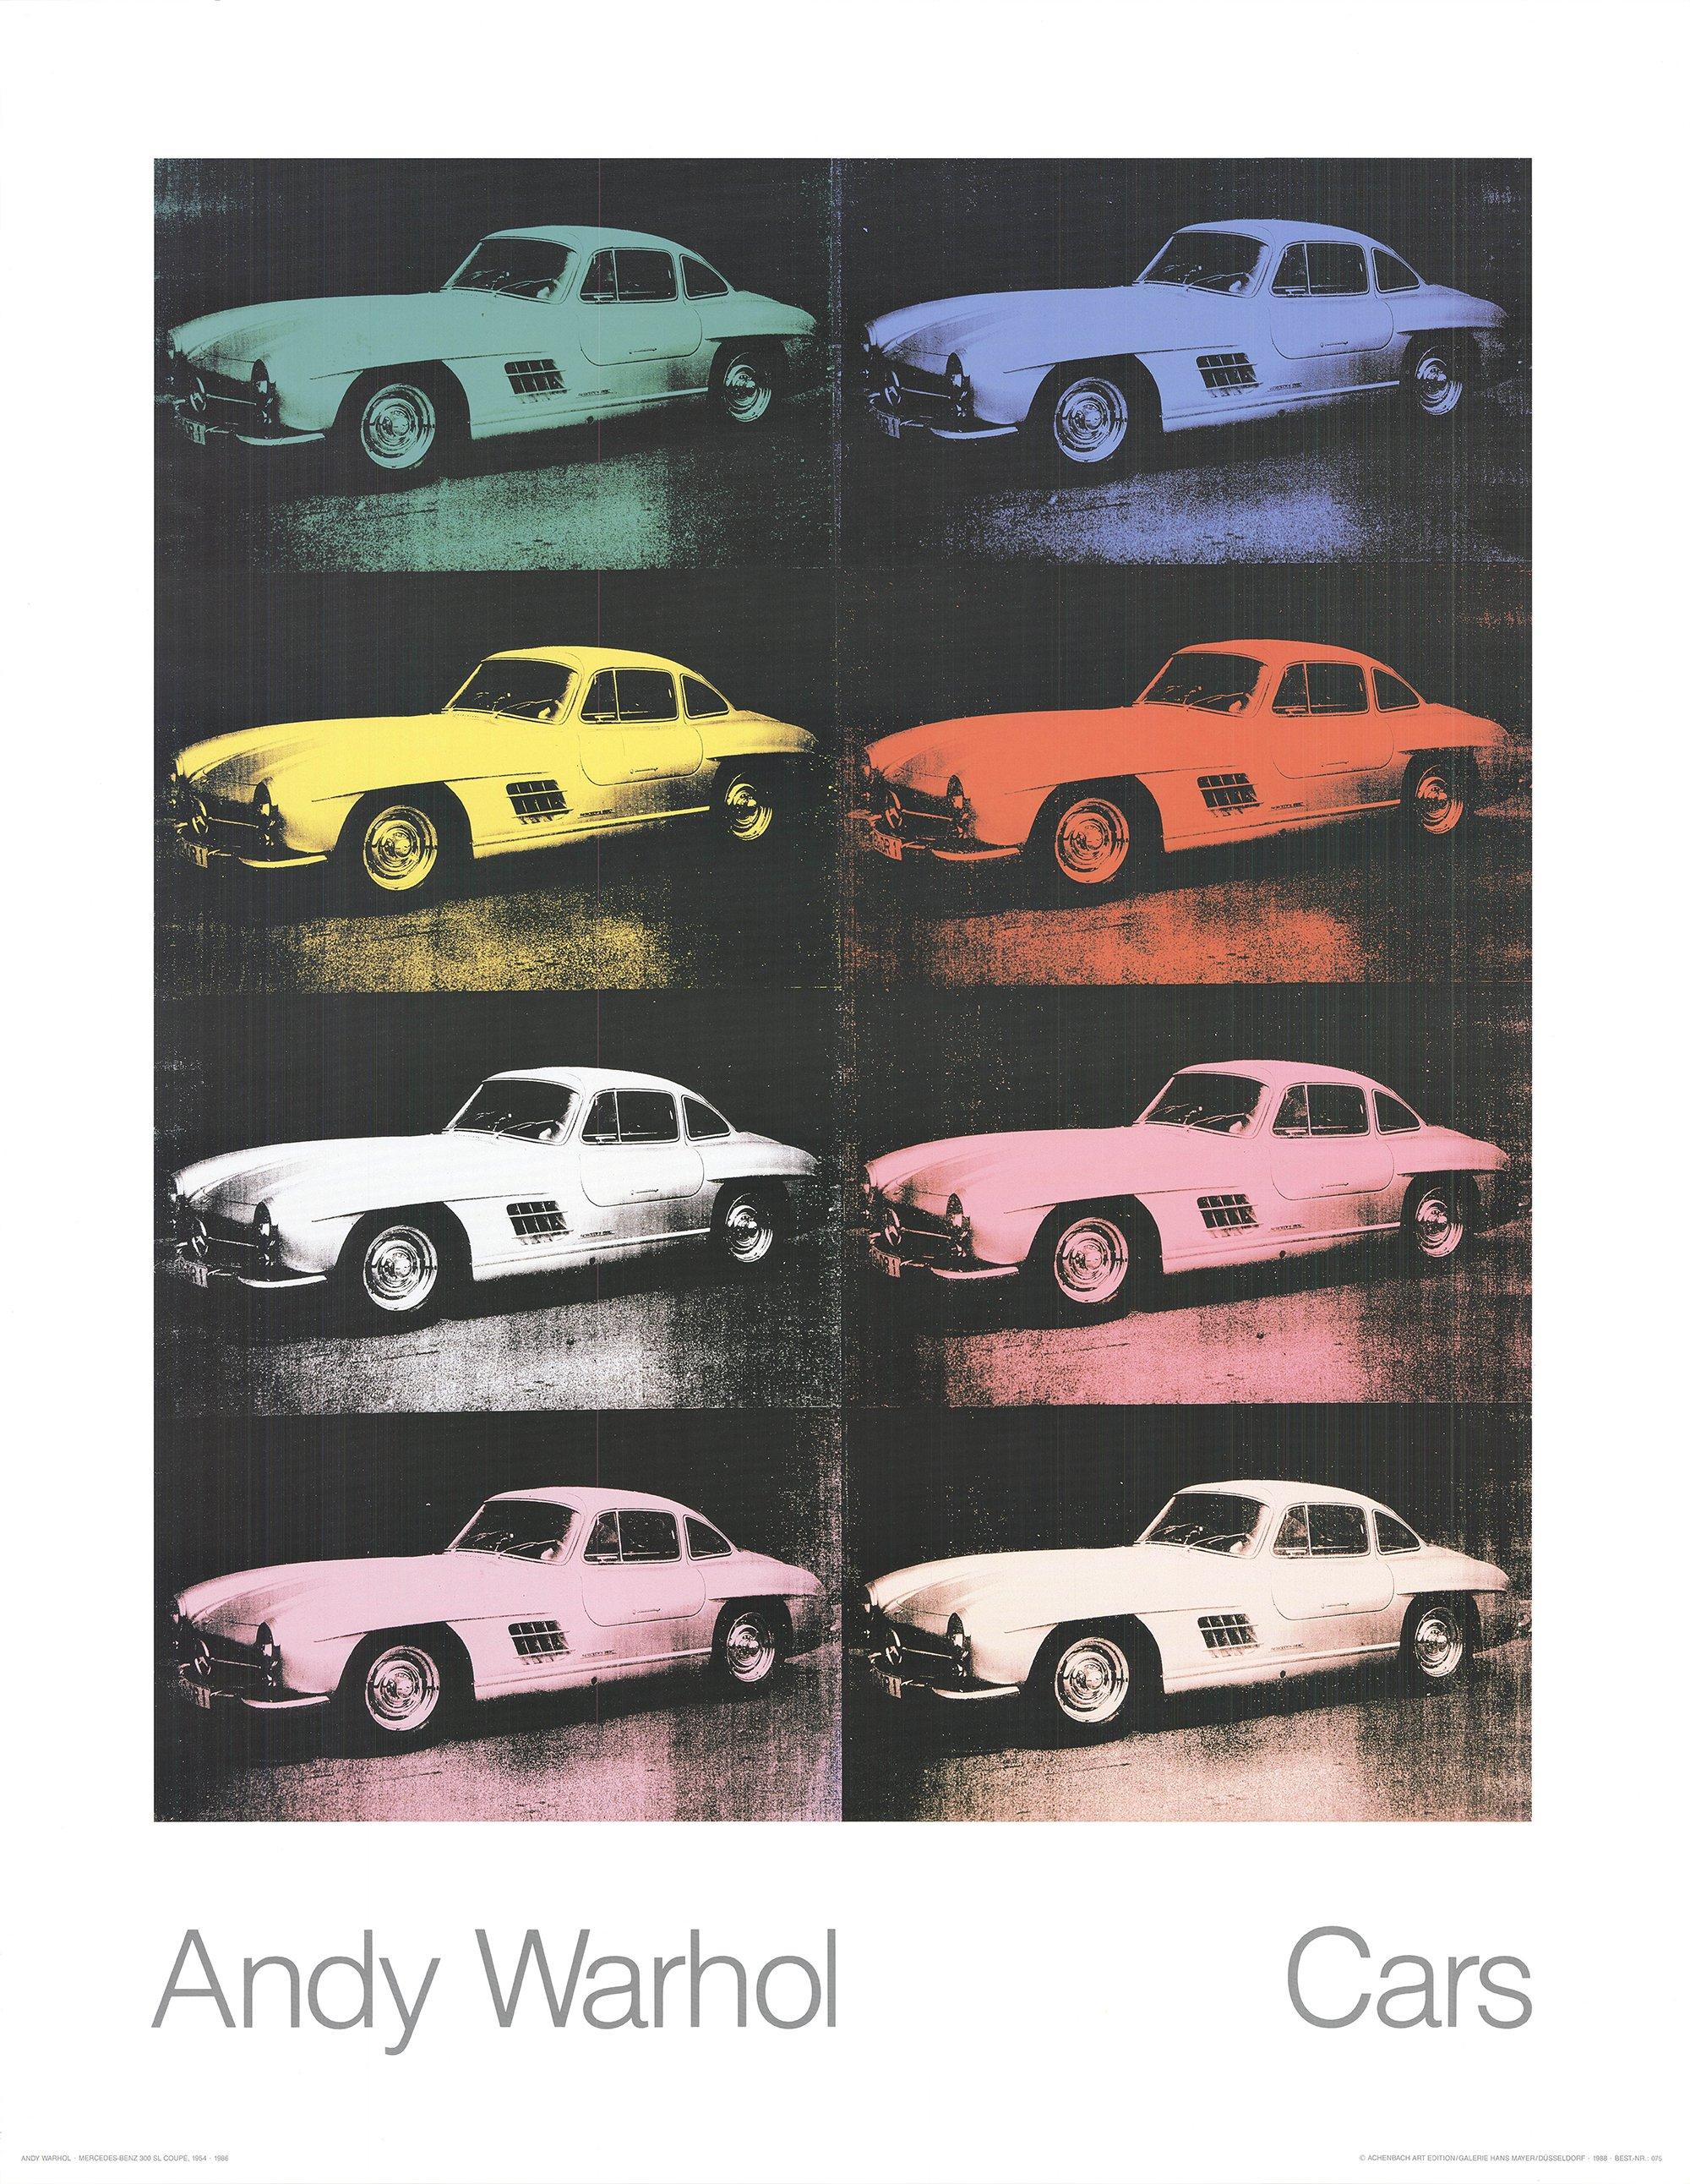 Paper Size: 35.5 x 27.5 inches ( 90.17 x 69.85 cm )
 Image Size: 27 x 22.5 inches ( 68.58 x 57.15 cm )
 Framed: No
 Condition: A: Mint
 
 Additional Details: Andy Warhol poster featuring the 300 SL Coupé, 1954 Multiples. Published in 1989.
 
